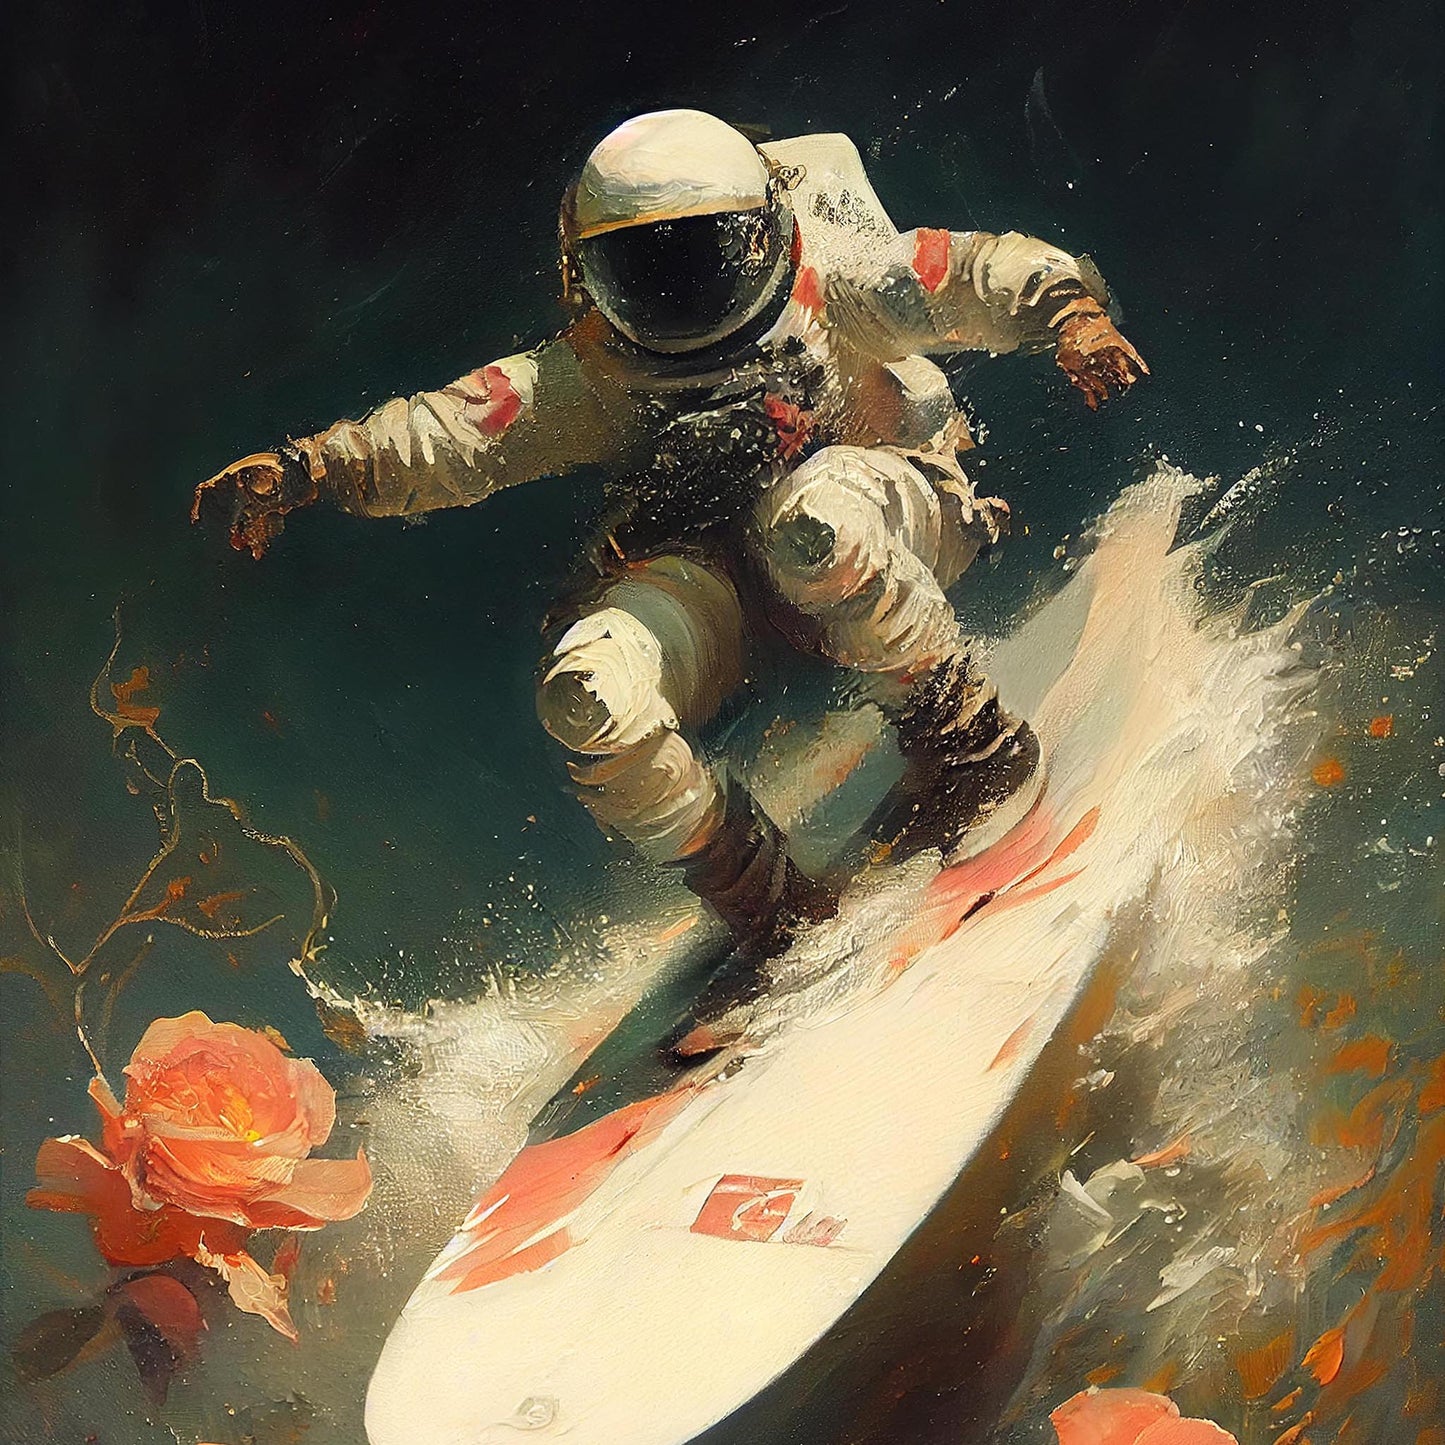 "My Space Wave" canvas print